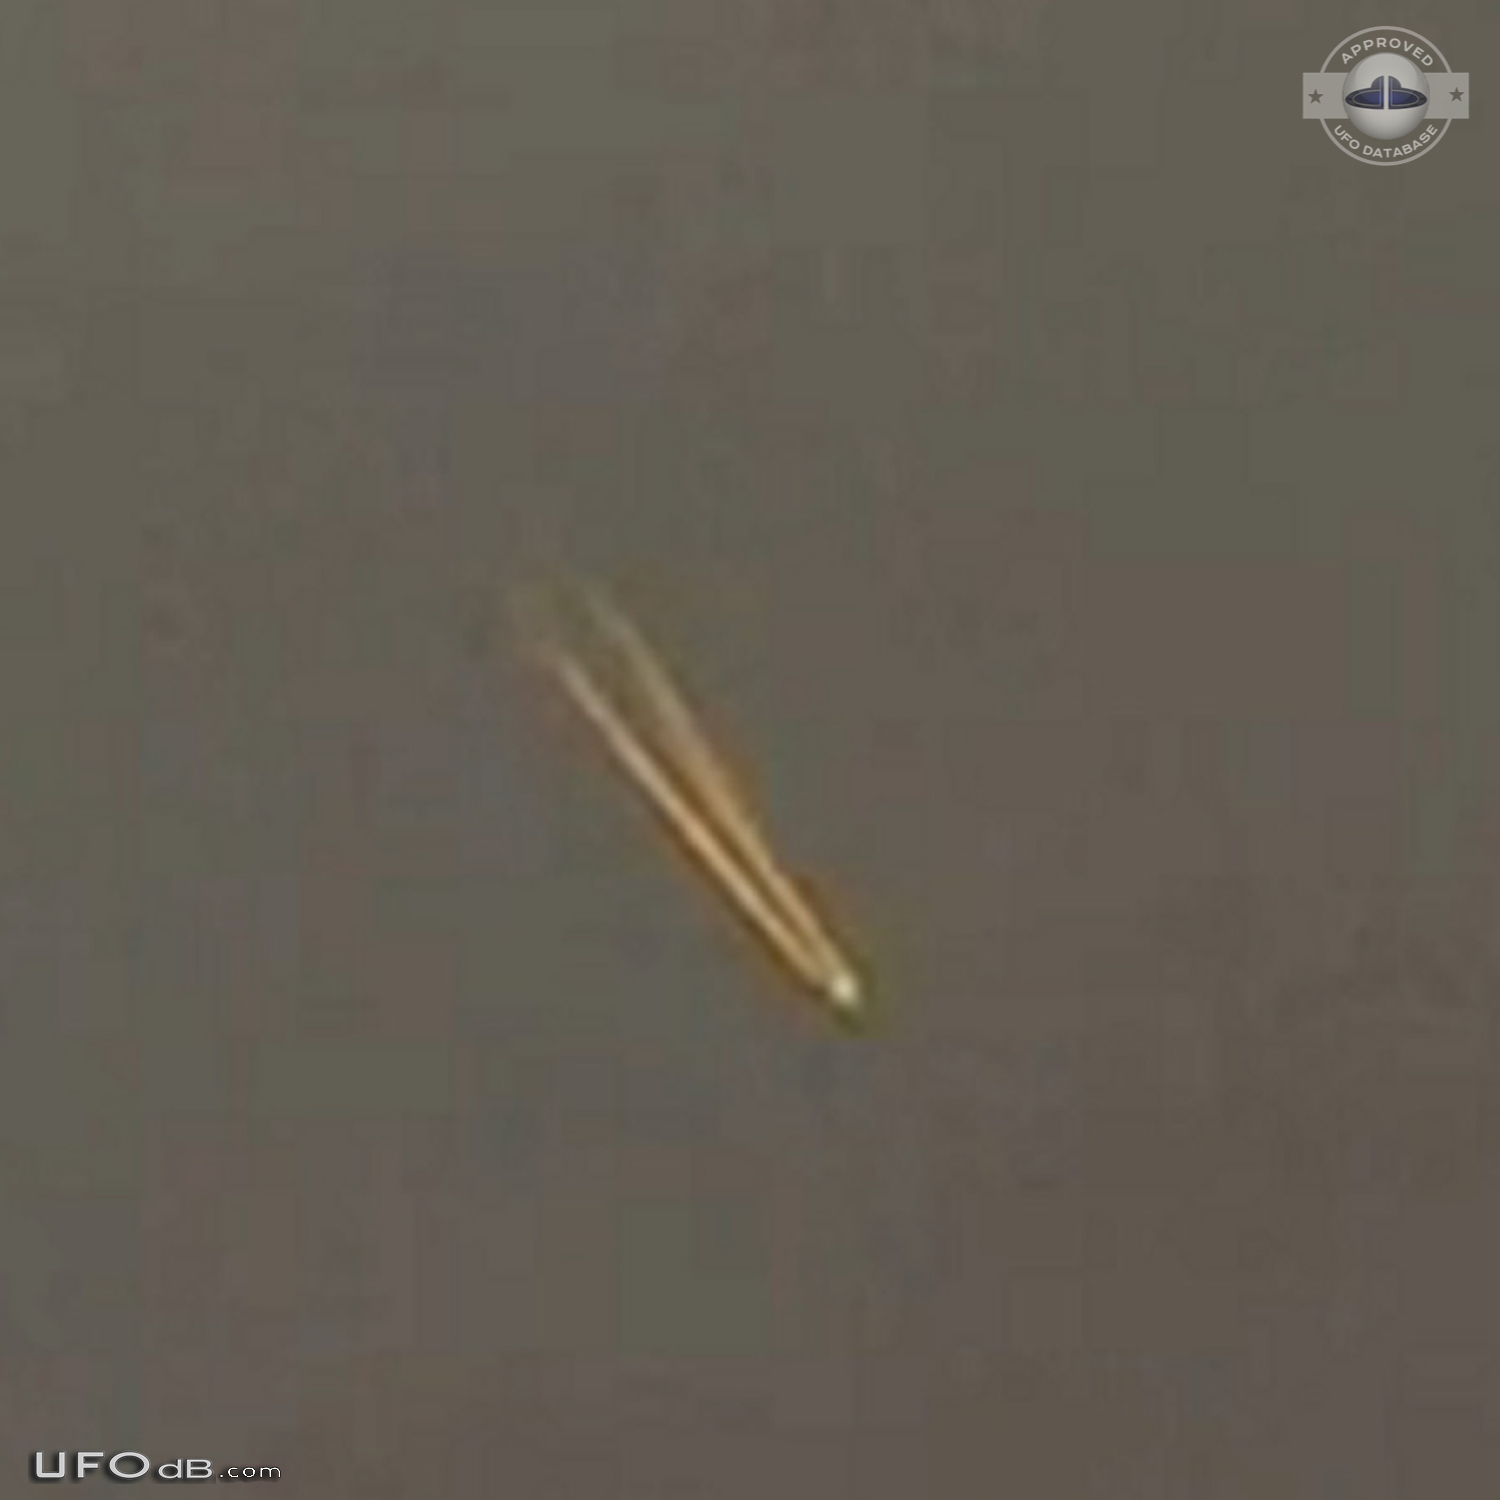 Thousands of people in Shanghai China saw a UFO with an Orange Tail UFO Picture #842-2